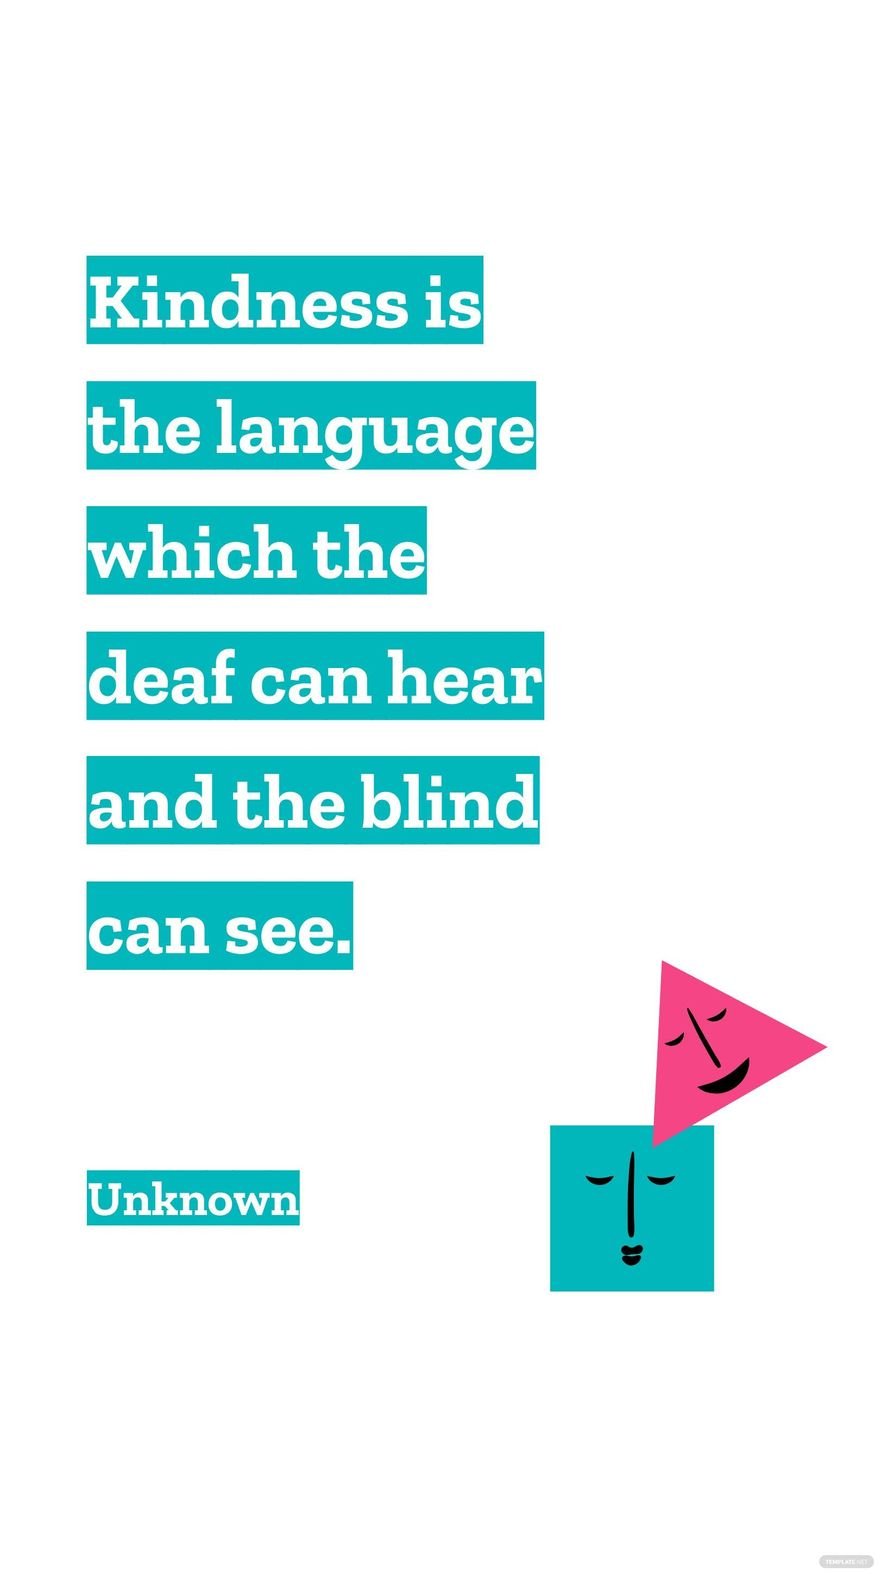 Free Unknown - Kindness is the language which the deaf can hear and the blind can see. in JPG